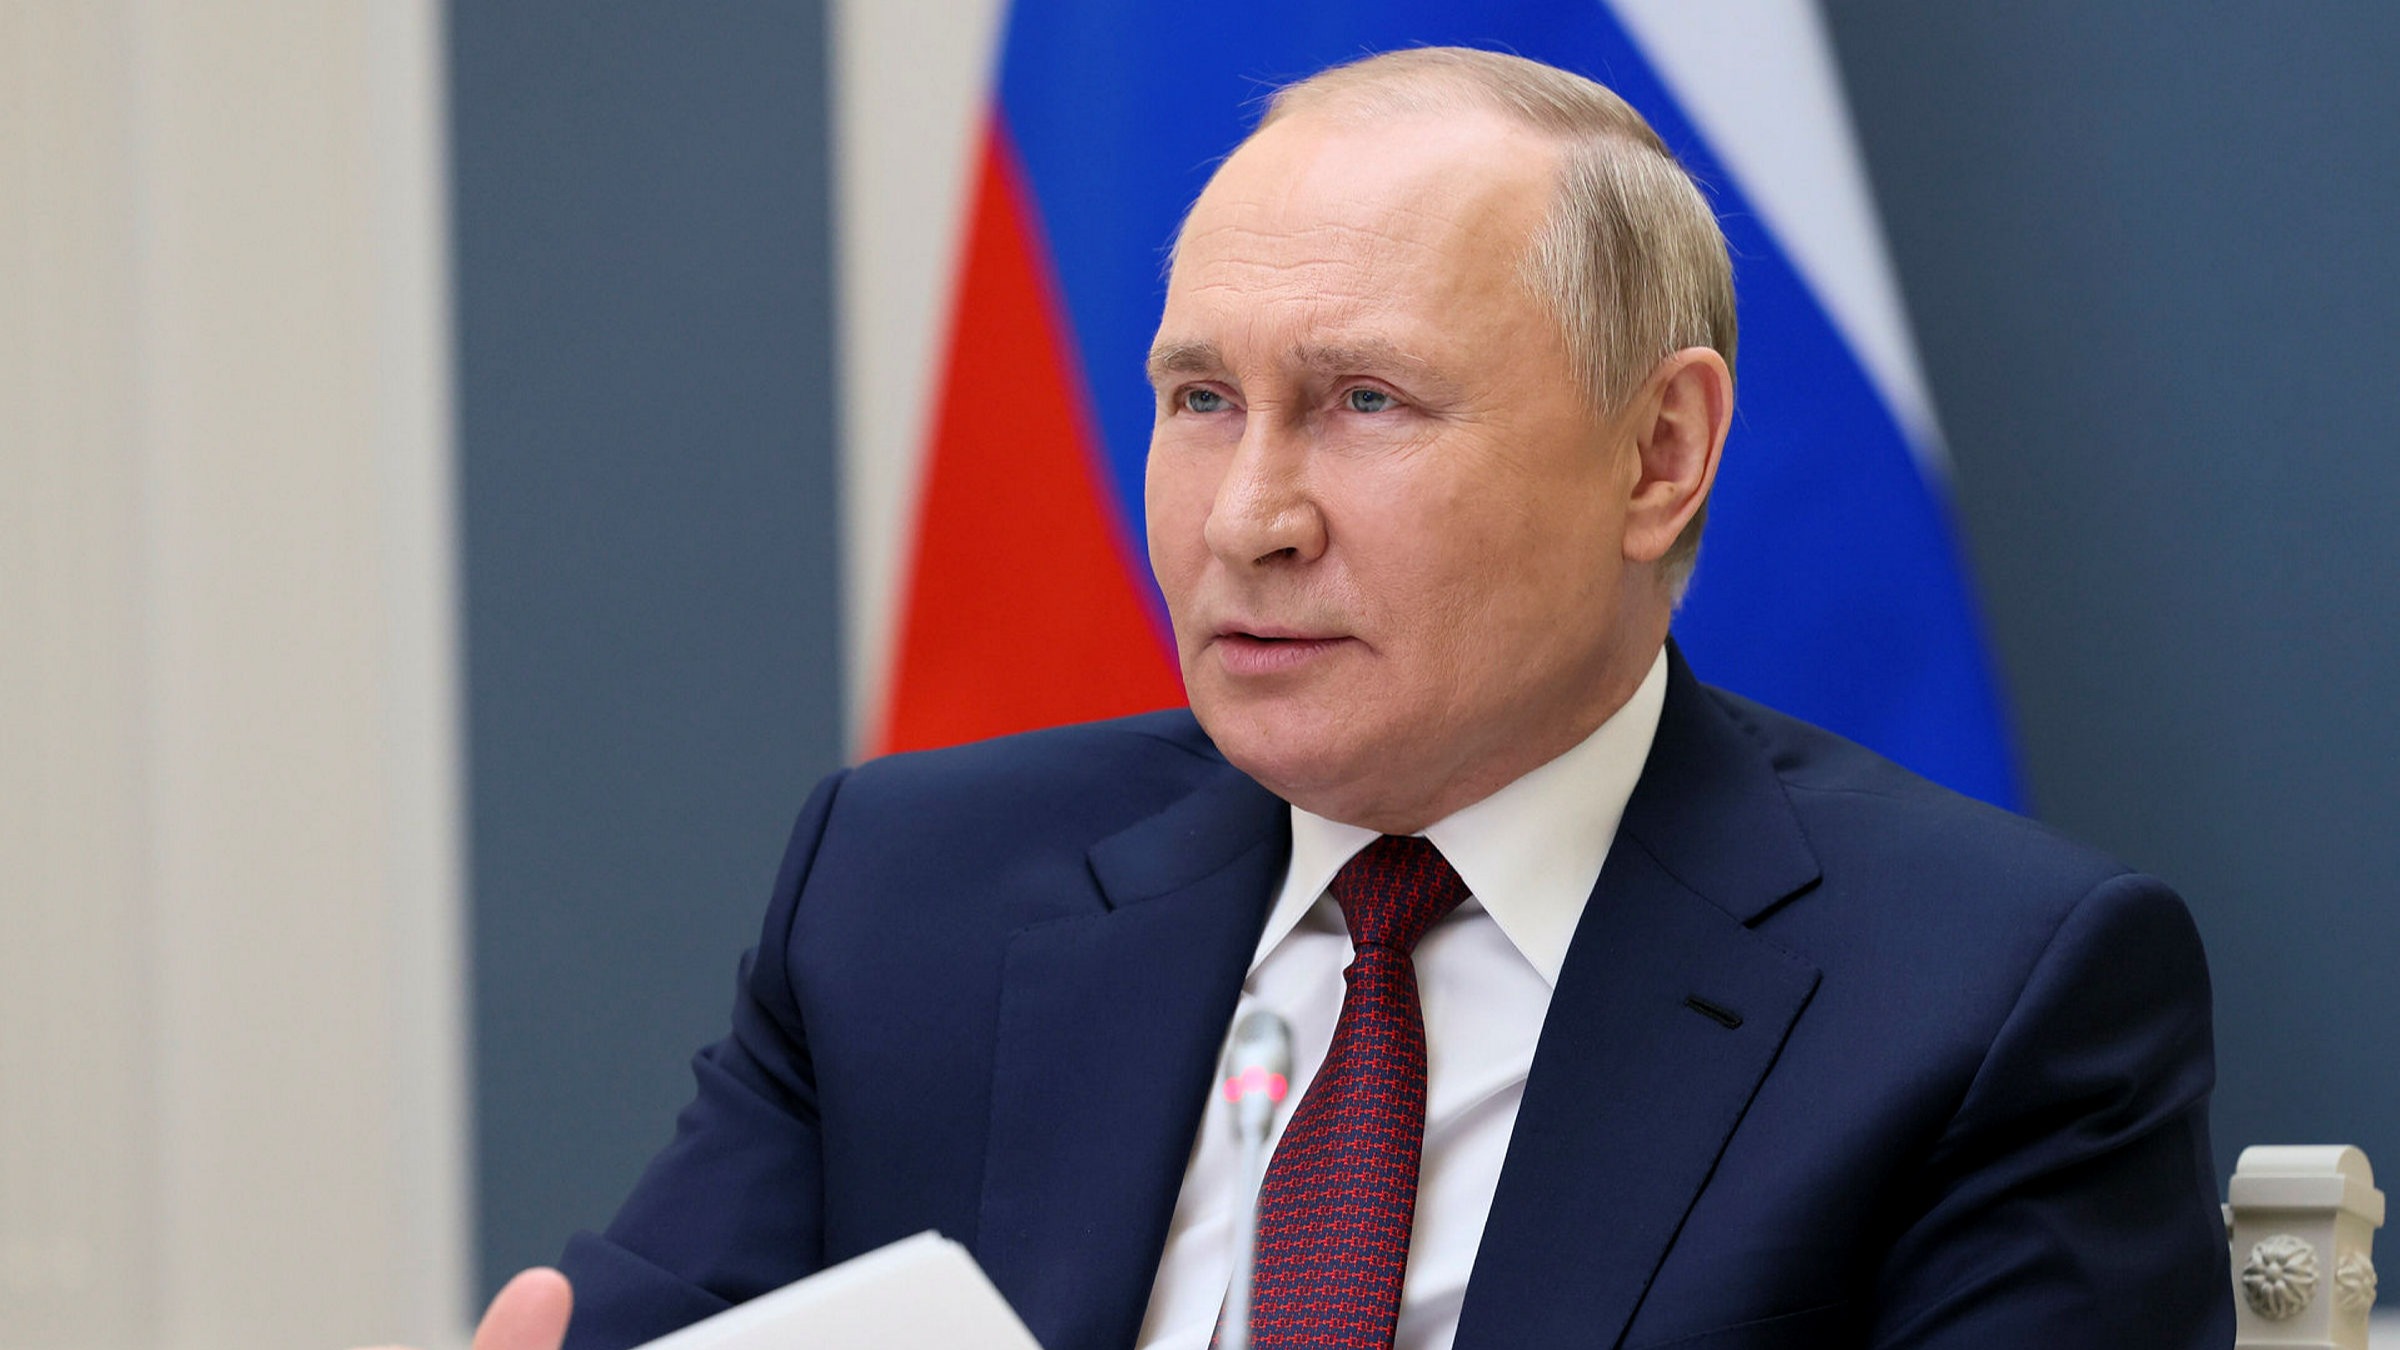 Live news updates from May 26: Putin confident Russia can shrug off  sanctions impact, UK introduces energy windfall tax | Financial Times